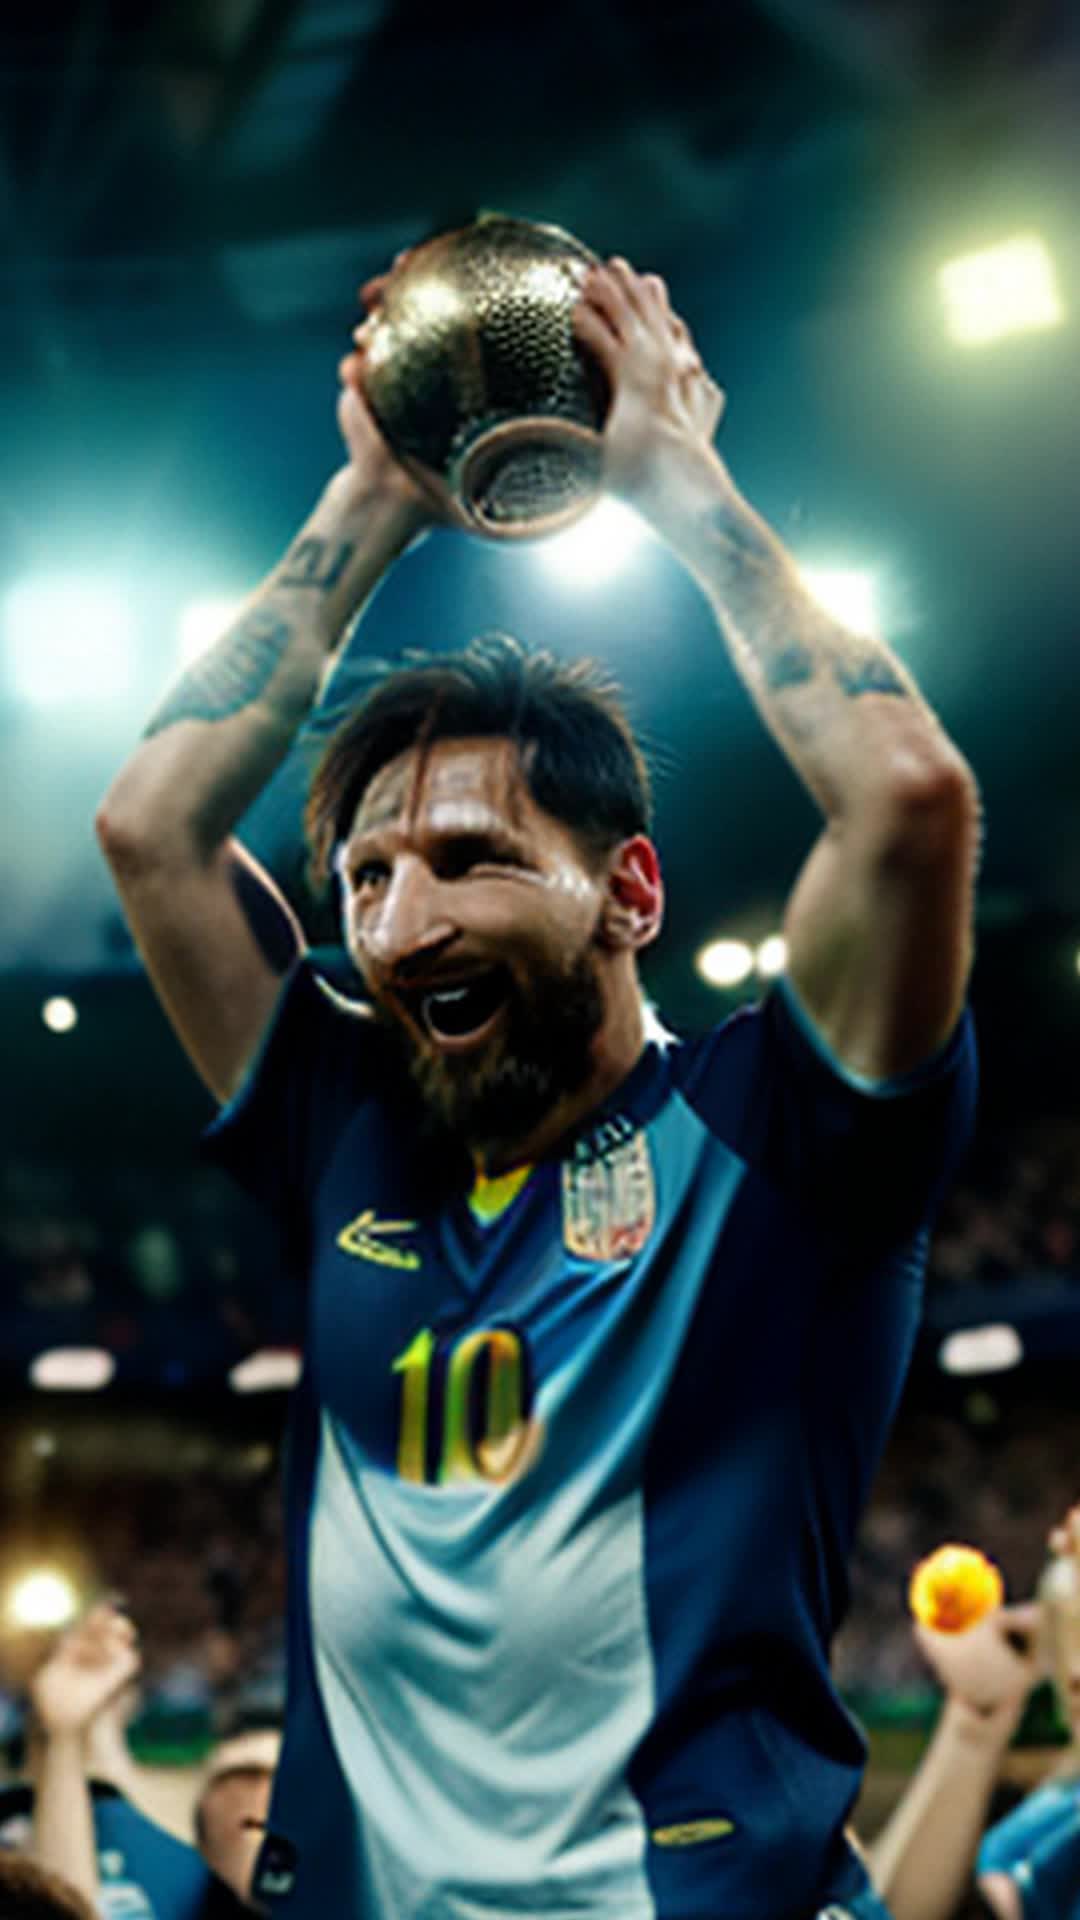 Lionel Messi, lifting World Cup trophy, euphoric celebration, teammates surrounding him, vibrant stadium atmosphere, confetti raining down, fans in grandstands cheering, Messi in iconic Argentina jersey, excited expressions, emotional moment, closeup shots, wideangle view of pitch and crowd, sparkling lights, dynamic movement, joy and triumph, highdefinition, heroic and cinematic, rendered by octane, detailed and sharp focus, soft shadows, vivid colors